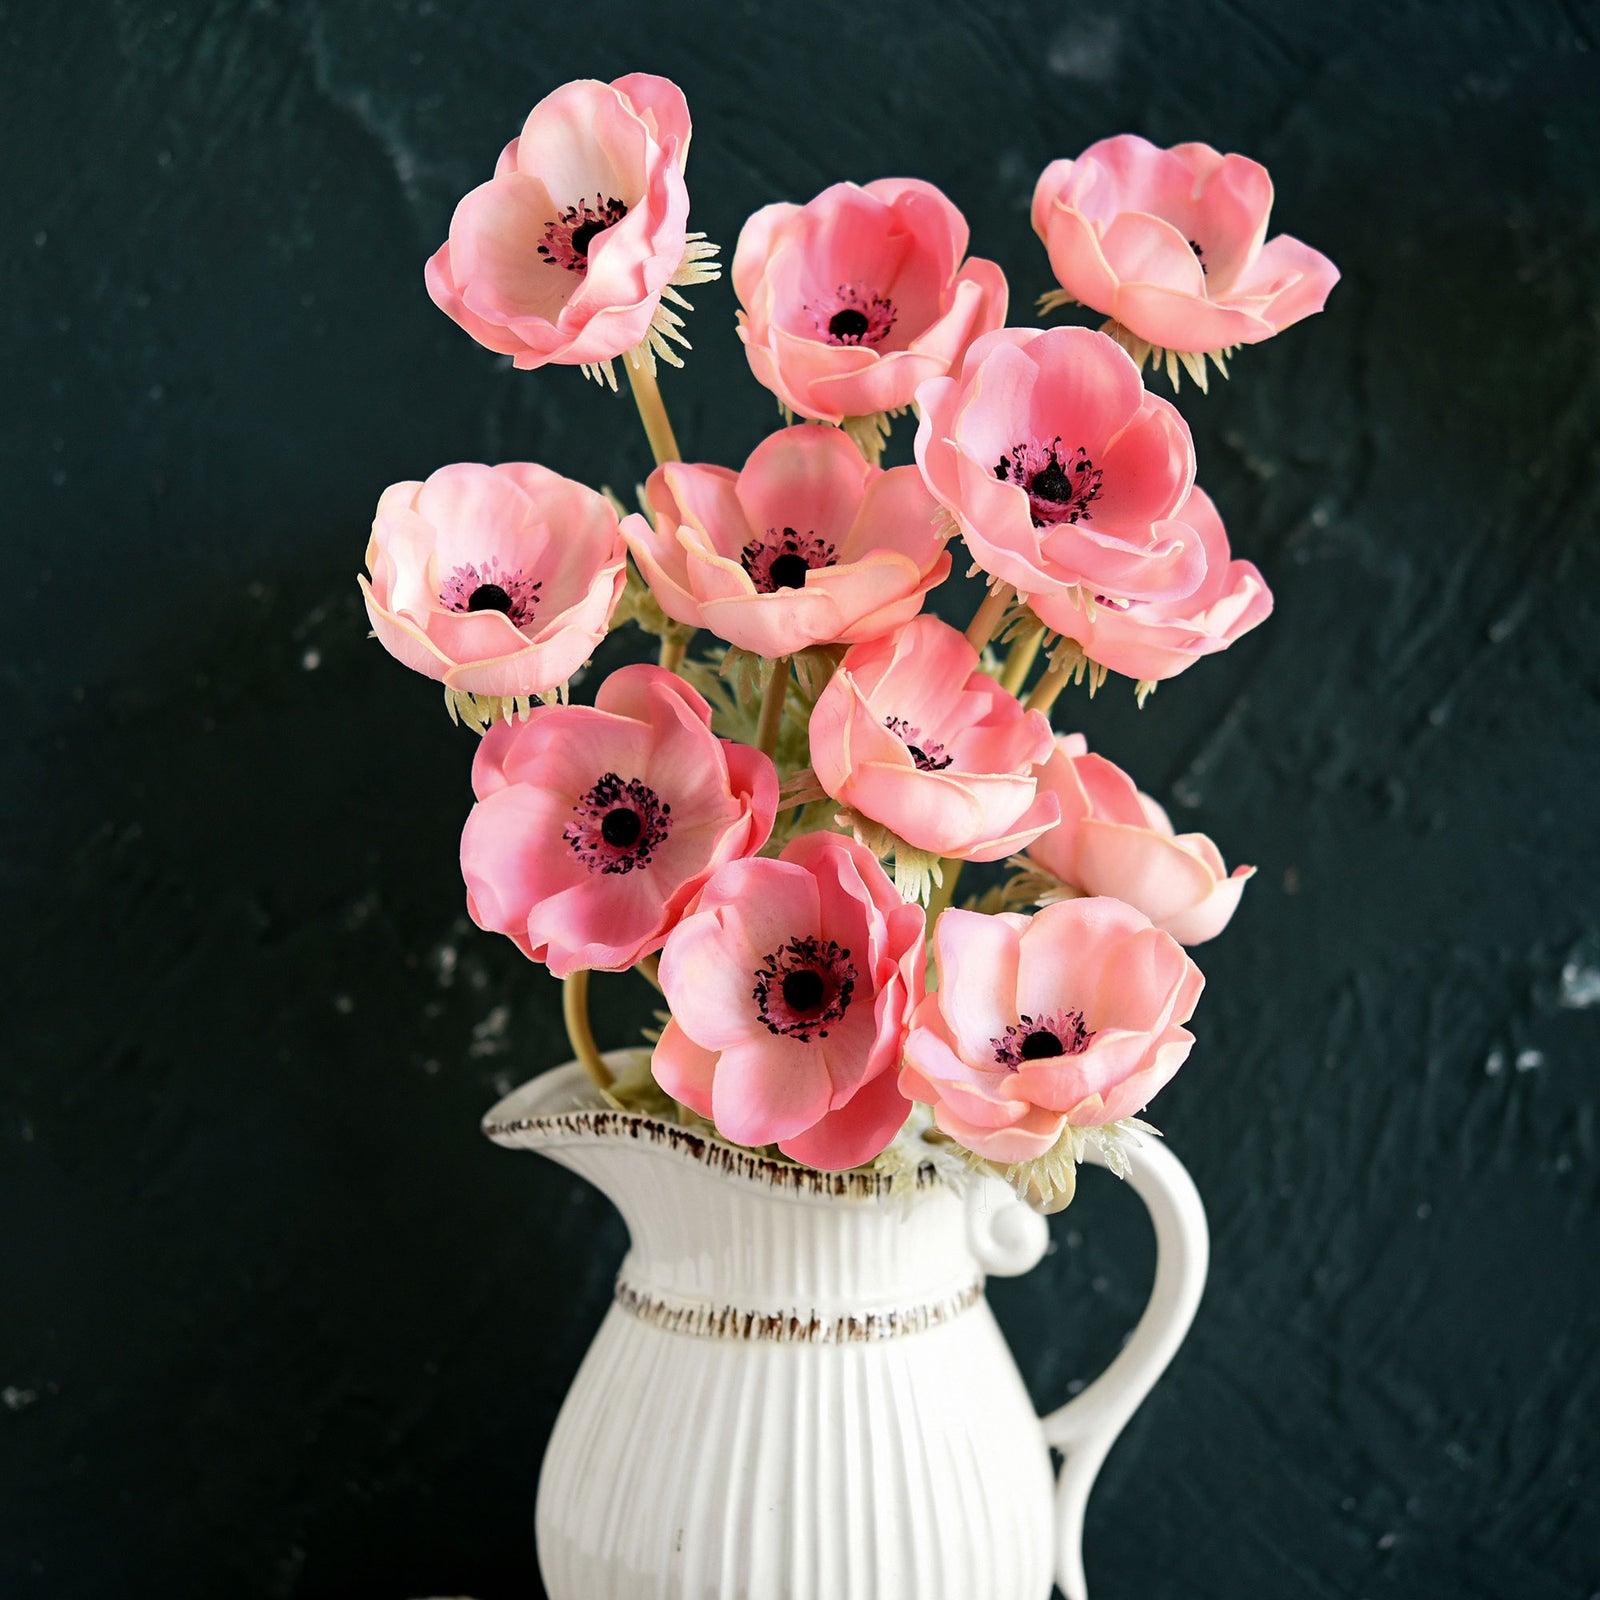 12 Long Stems of ‘Real Touch’ Artificial (Pink) Anemone Flowers, Wedding Bouquet Flower Arrangement, 45cm (17.7 inches)